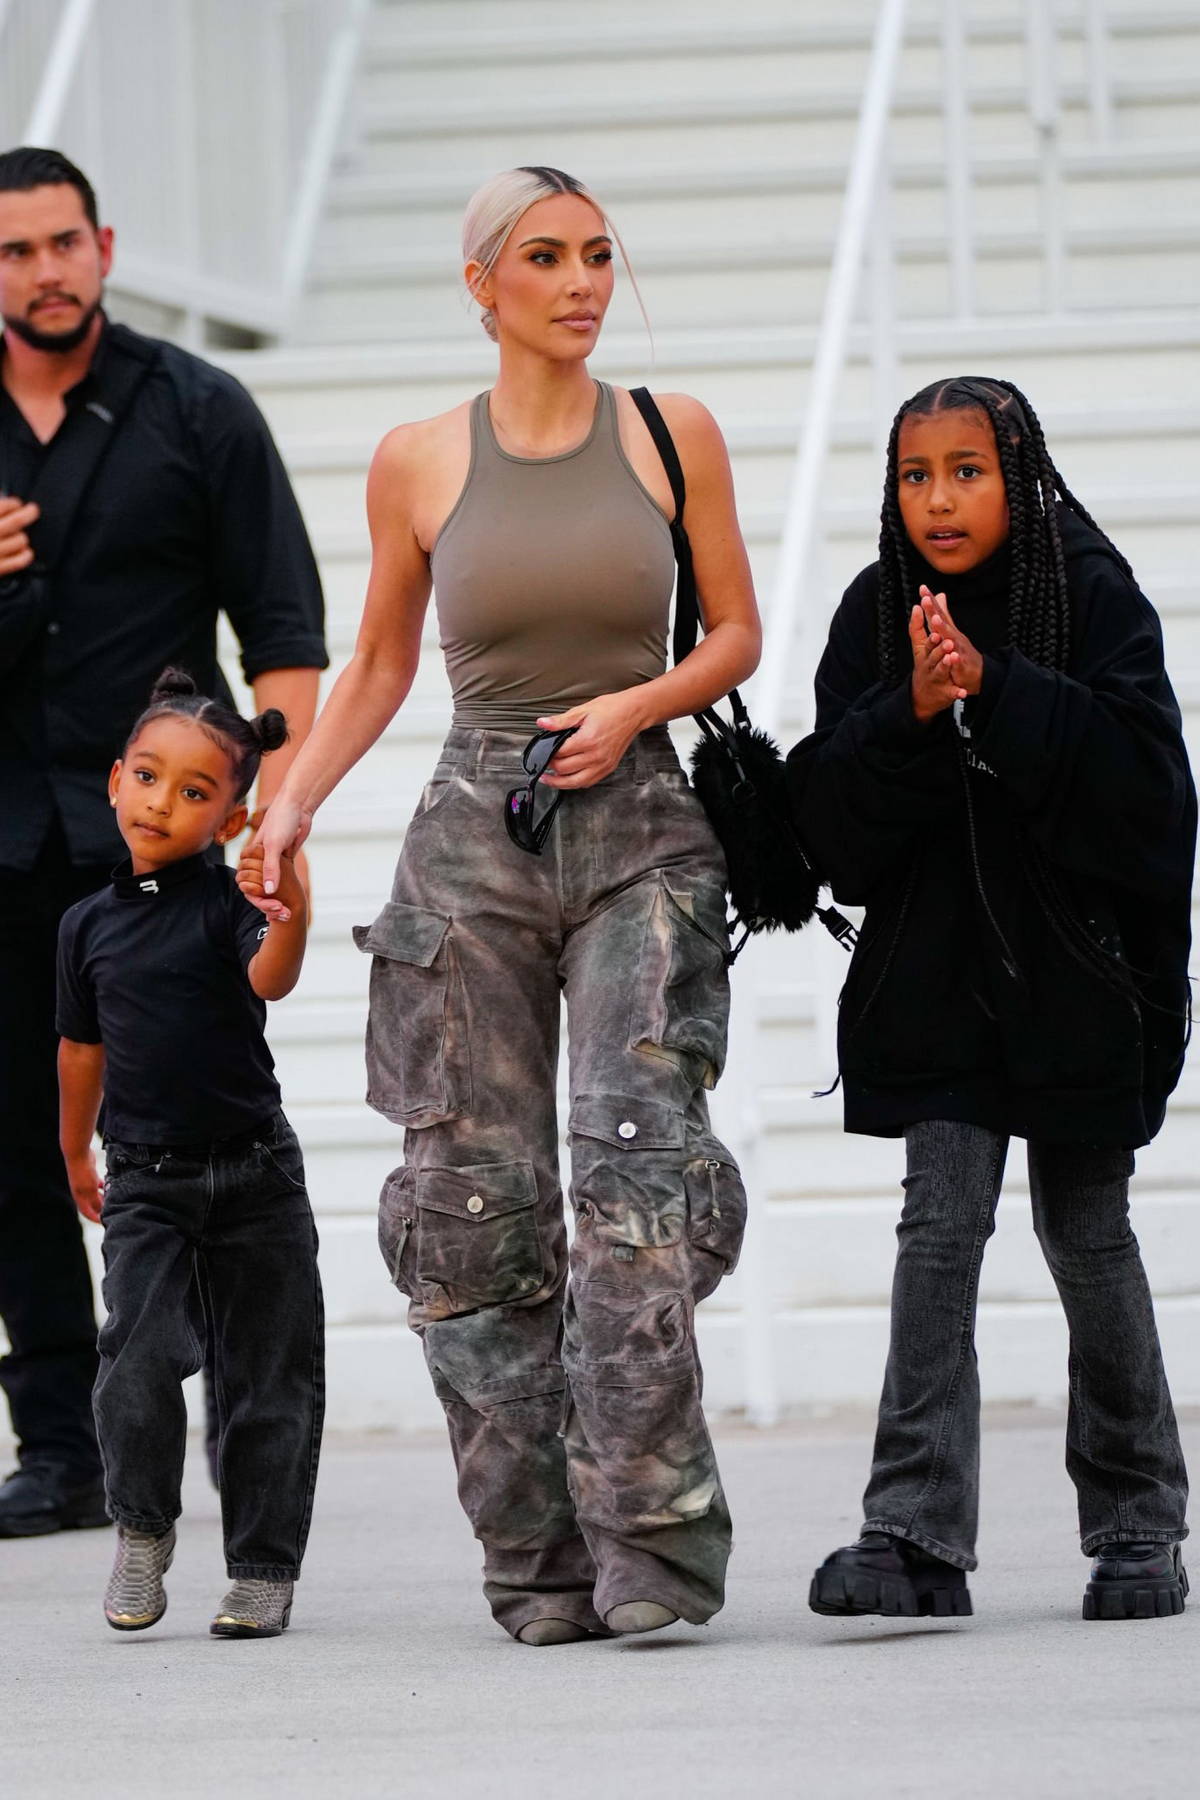 https://www.celebsfirst.com/wp-content/uploads/2022/07/kim-kardashian-rocks-a-skin-tight-tank-top-and-stone-washed-cargo-pants-while-out-with-her-daughters-in-new-york-city-120722_20.jpg